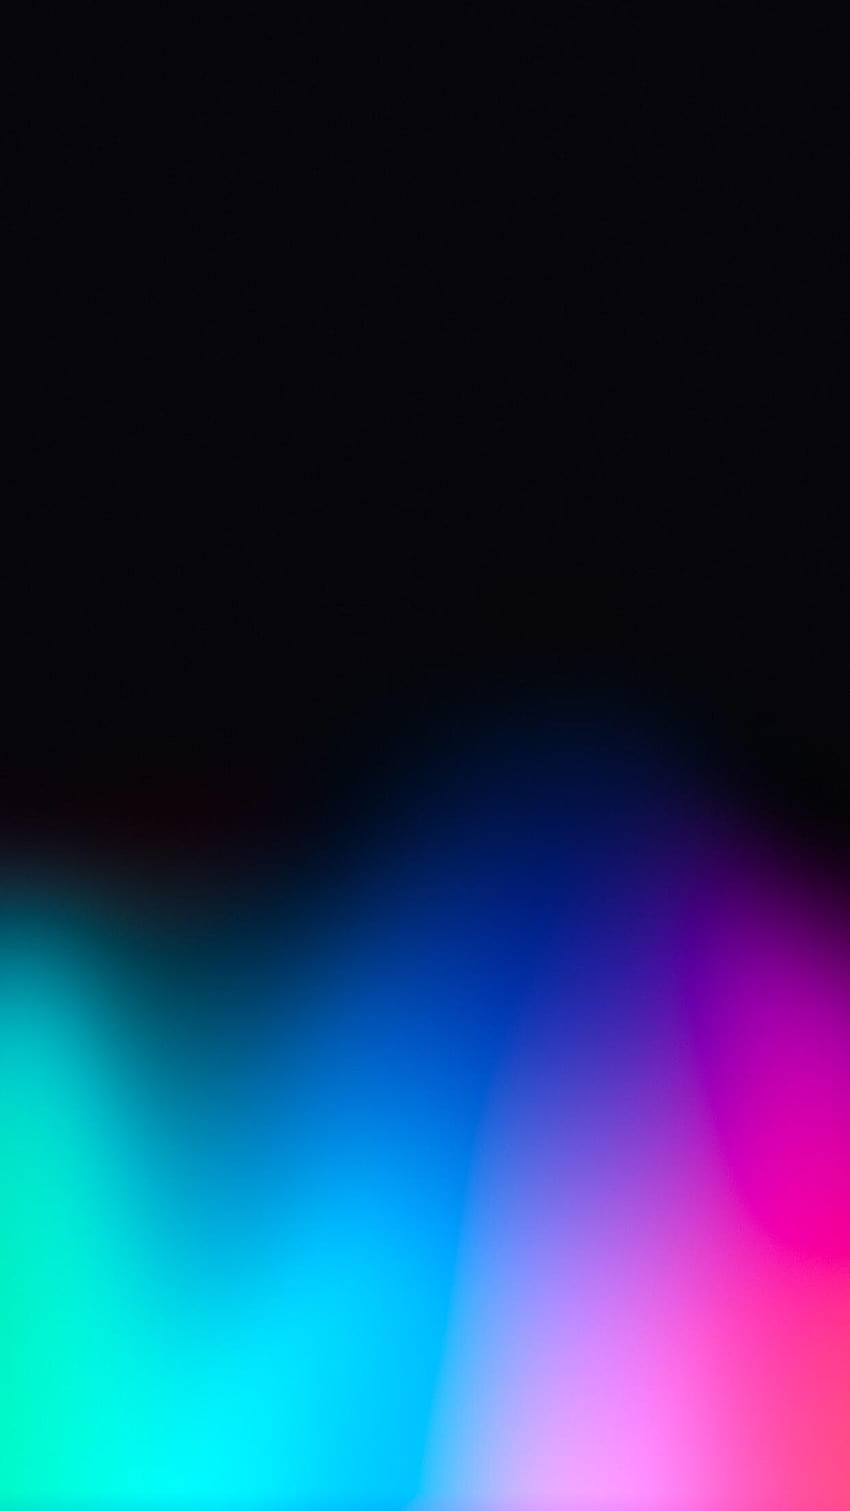 discussion] Try out this on your lock screen! The way the colors fade in is amazing... : r/iOSBeta, color fade HD phone wallpaper